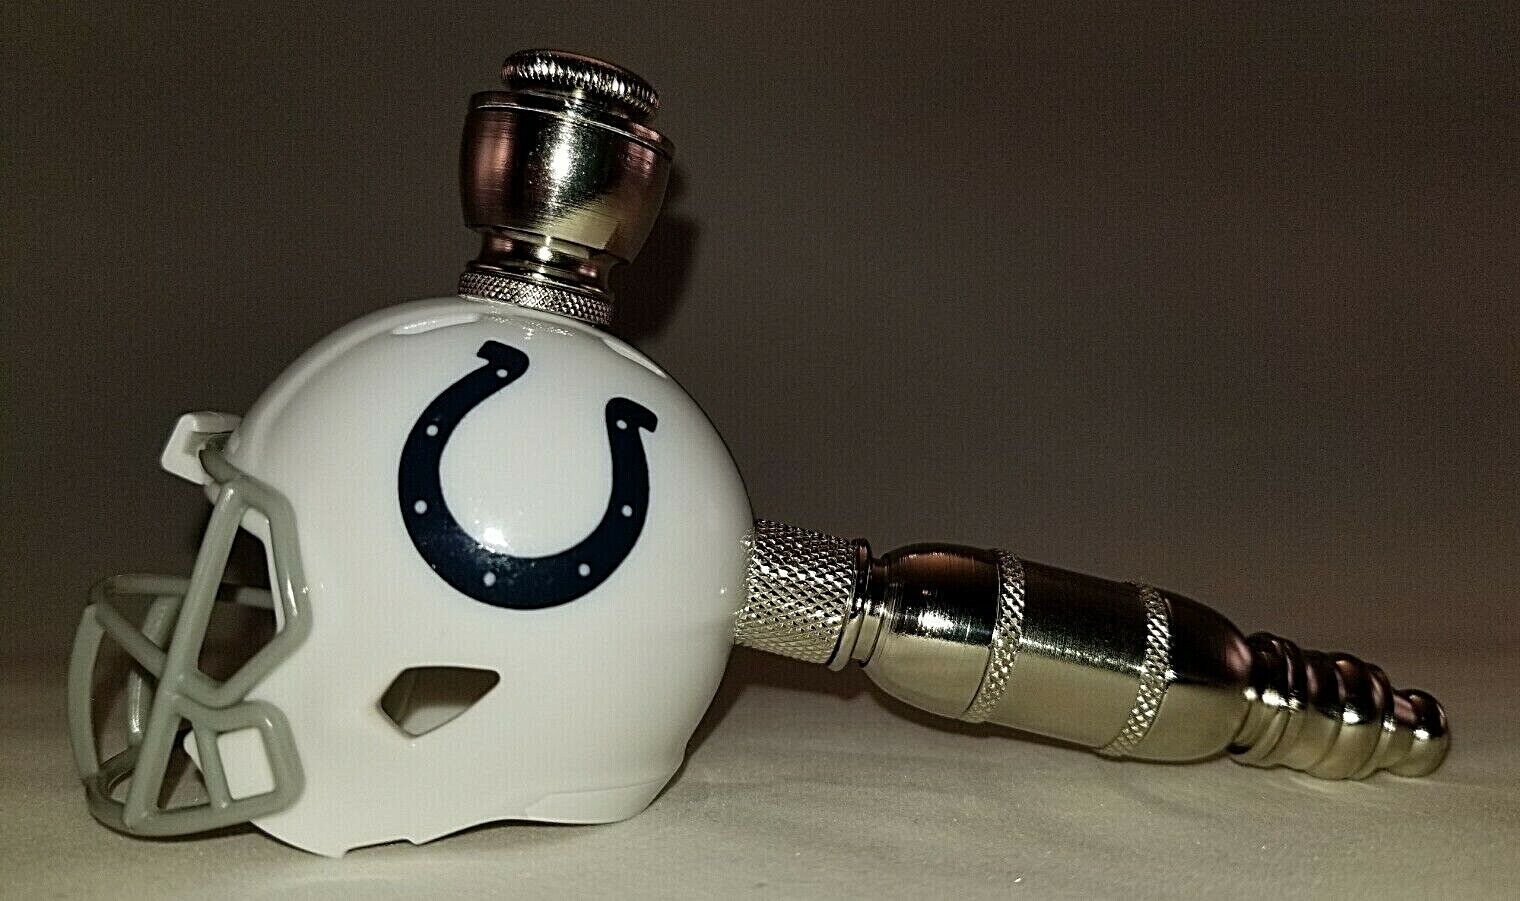 INDIANAPOLIS COLTS FOOTBALL HELMET SMOKING PIPE LARGE STRAIGHT DESIGN